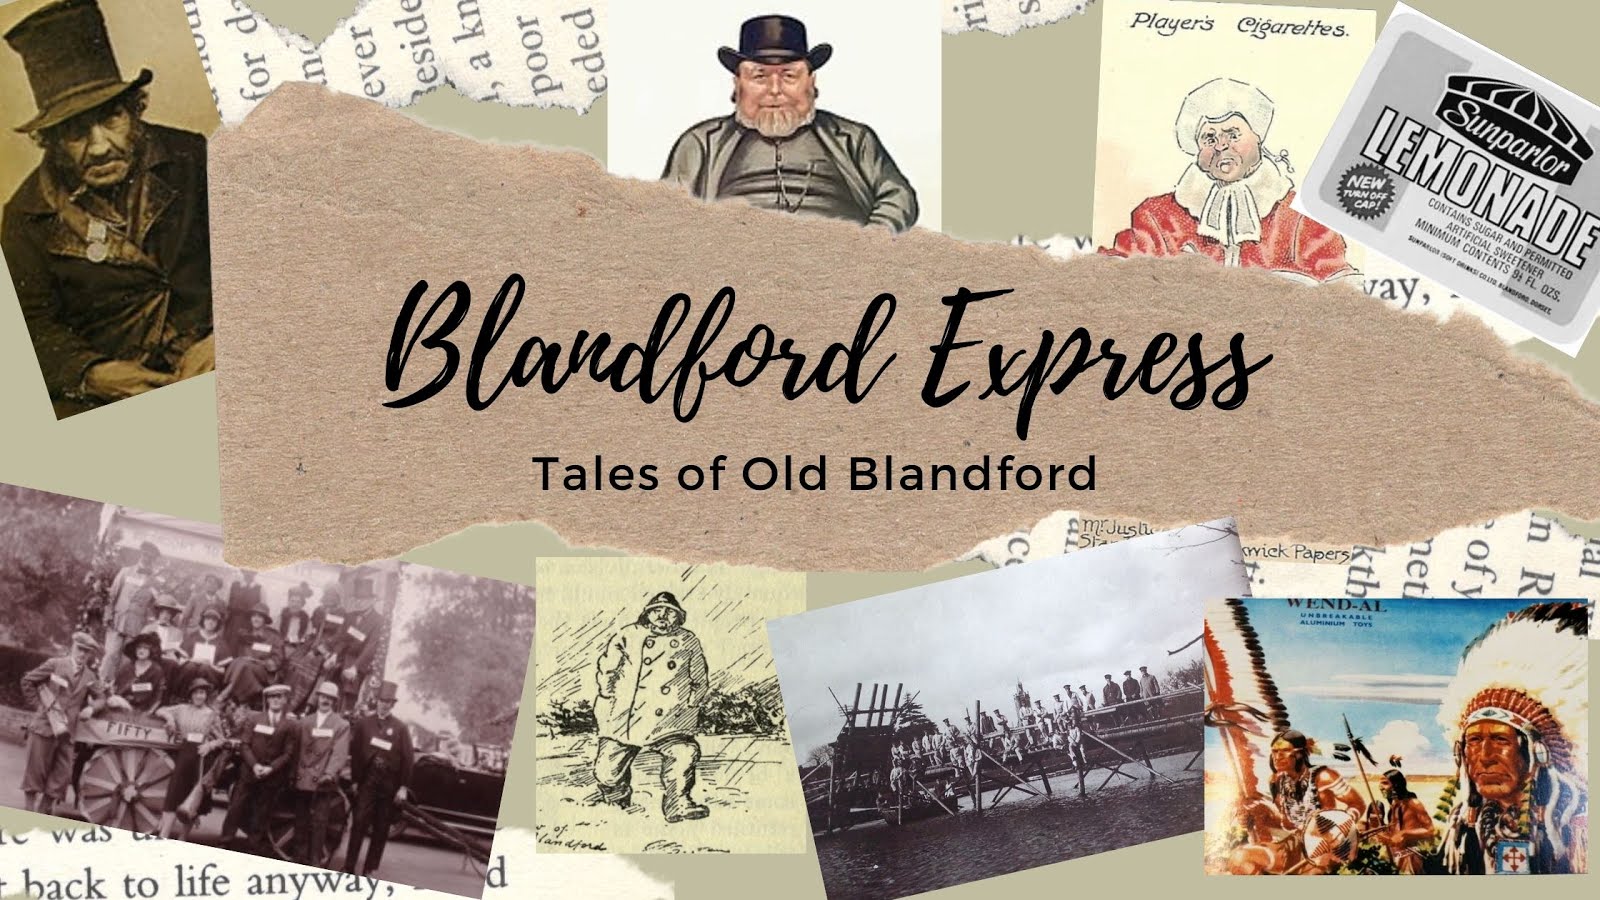 The Blandford Express